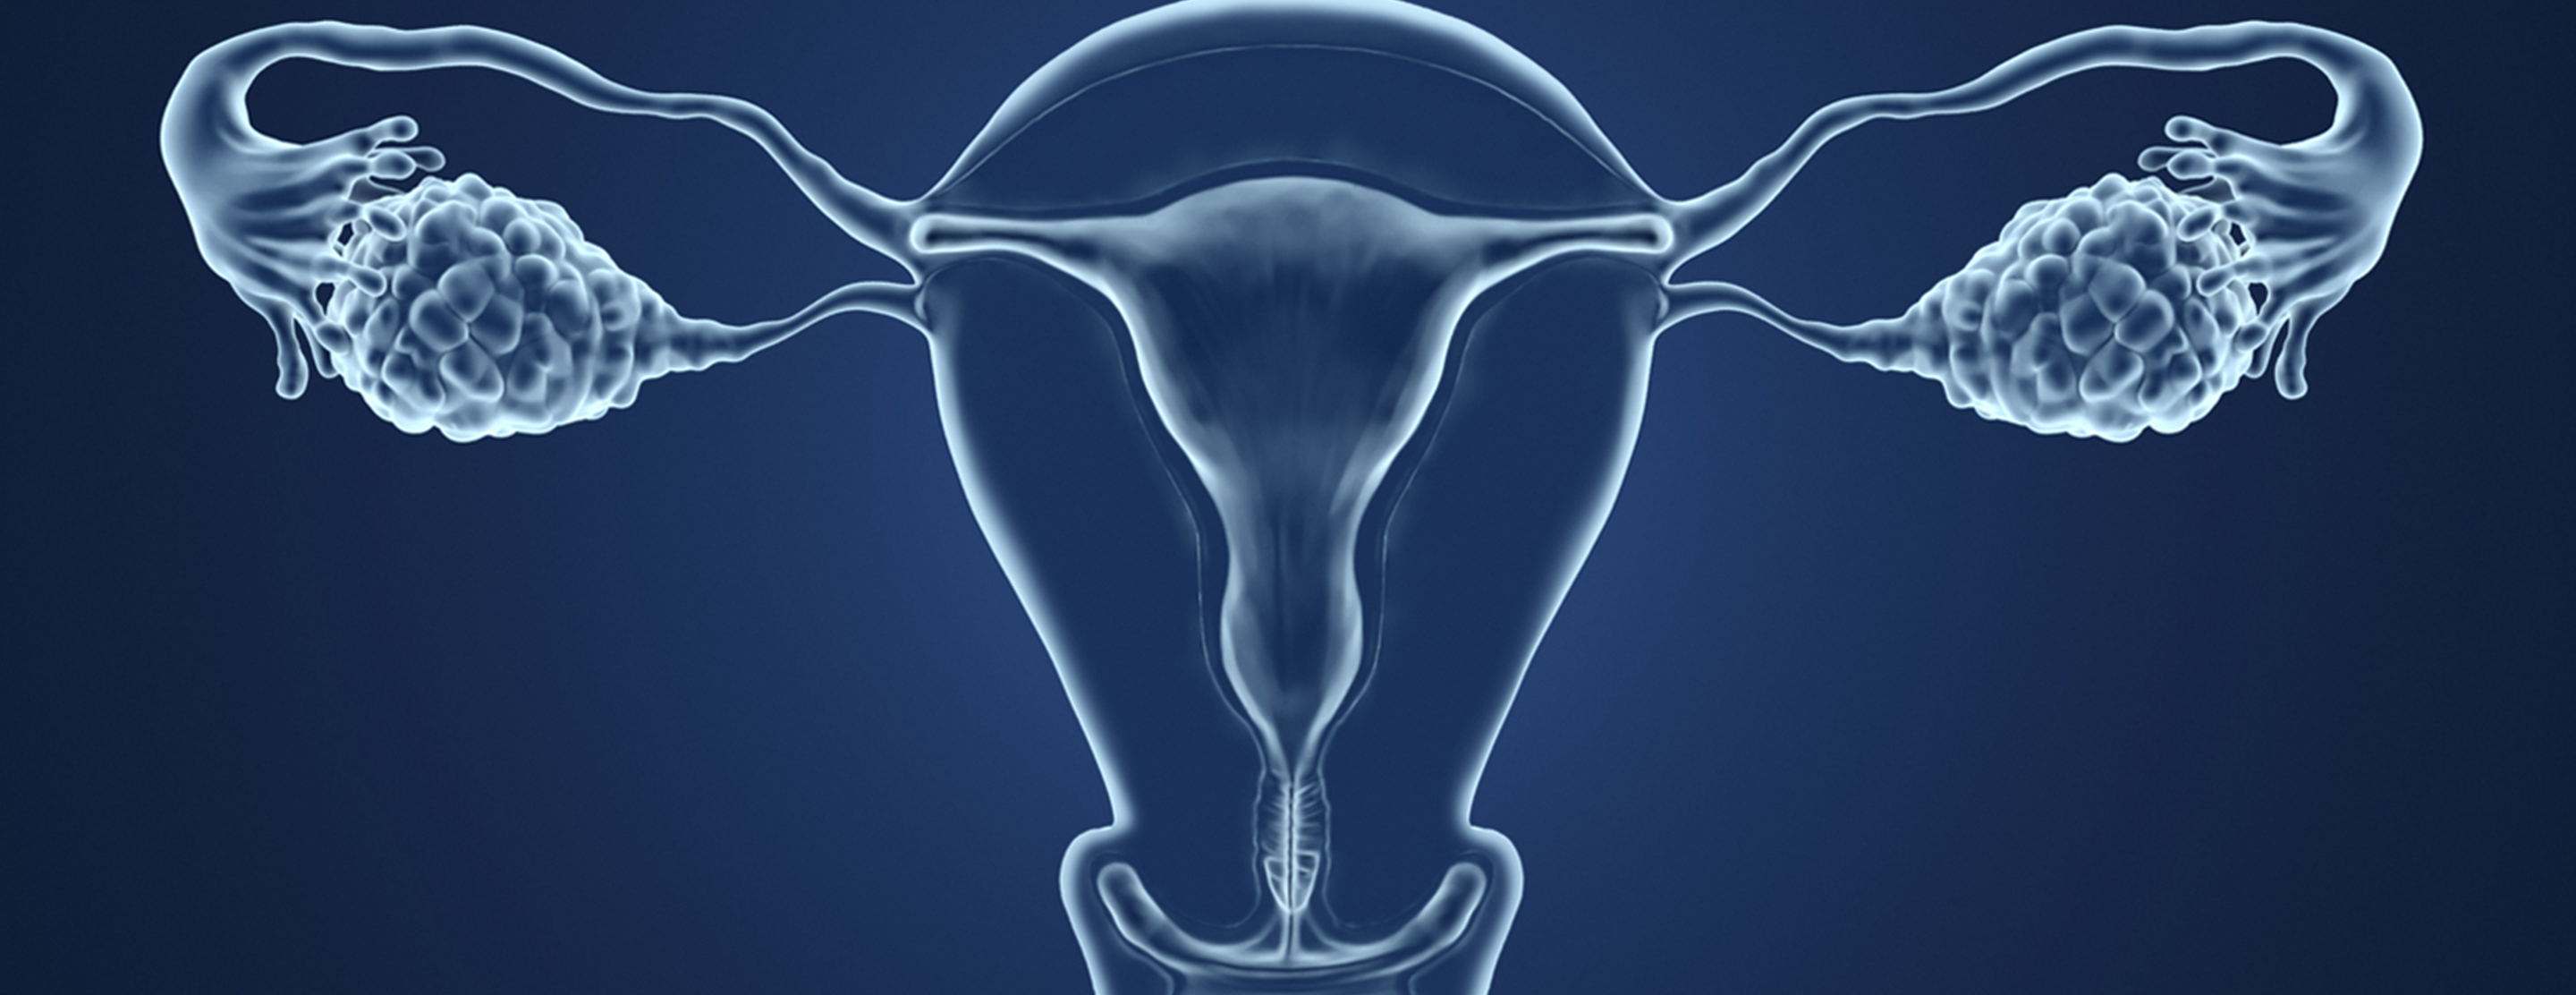 Hysterectomy | Conditions & Treatments | UCSF Health